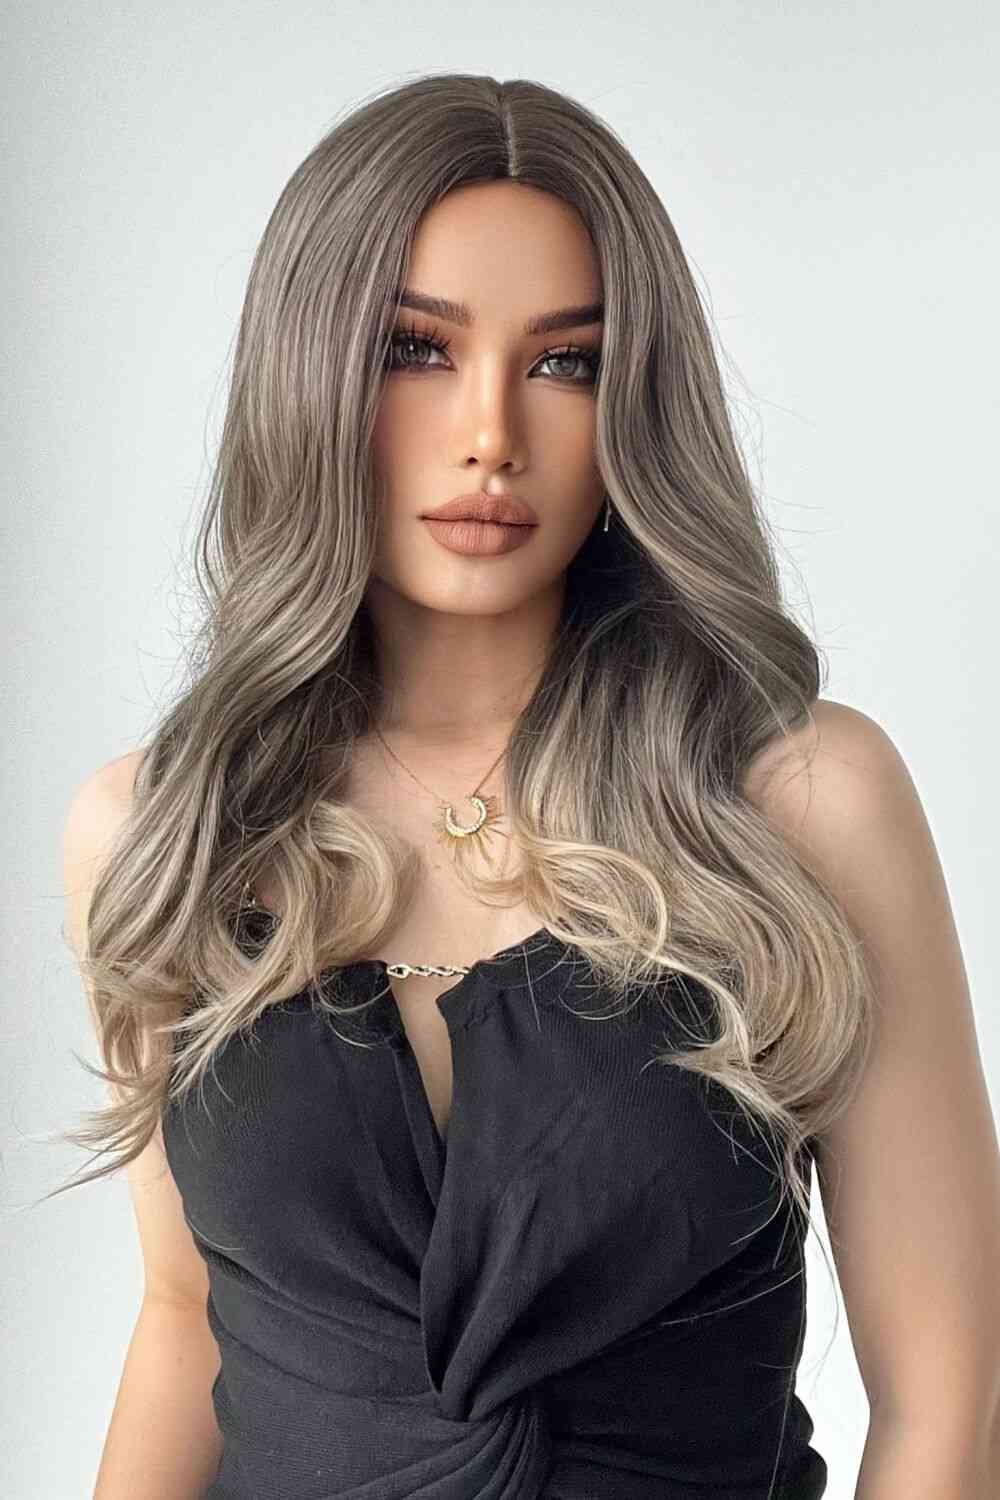 13*1" Full-Machine Wigs Synthetic Long Straight 24"   